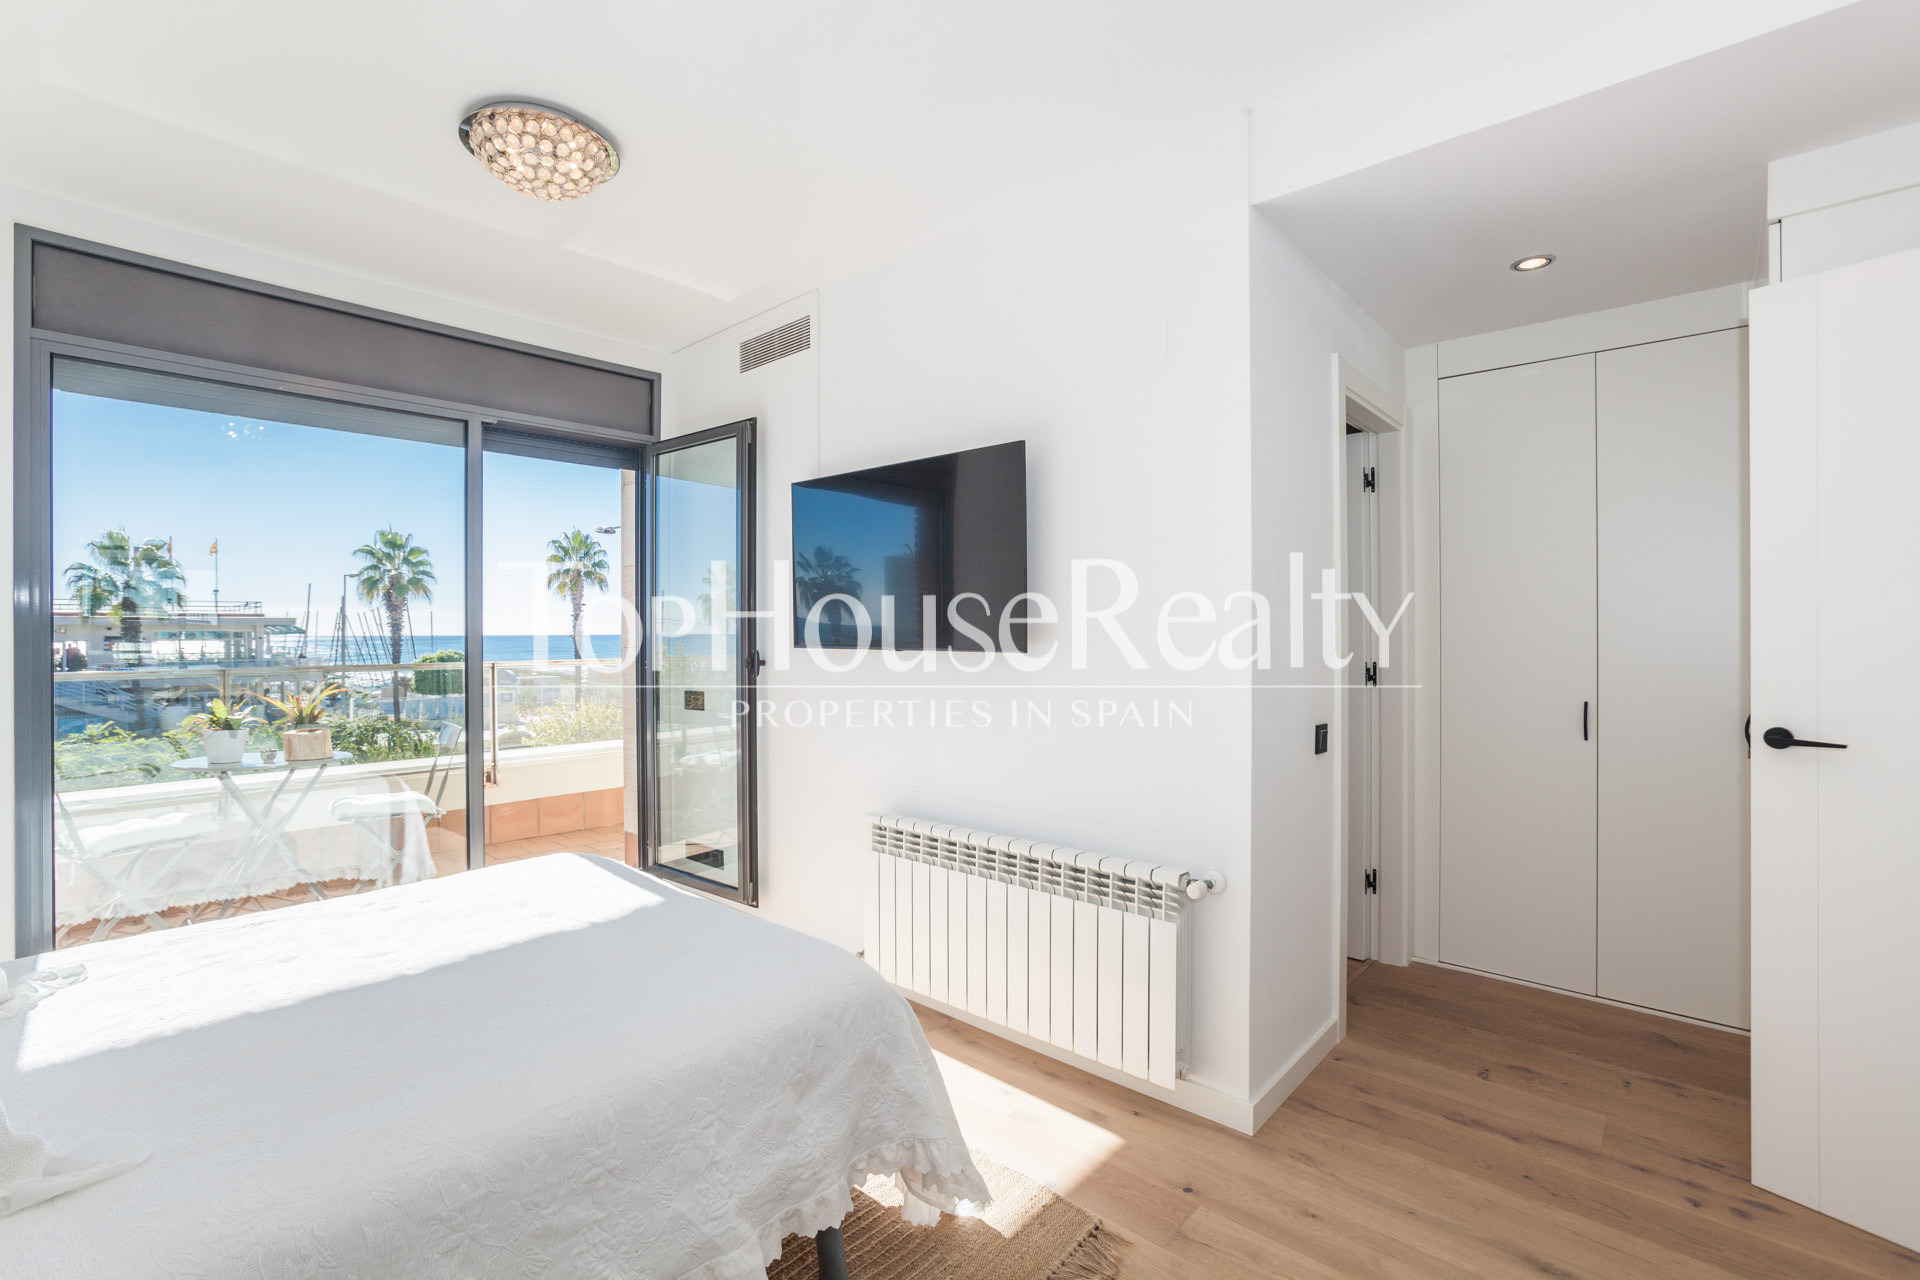 Townhouse in front of the sea in Castelldefels.